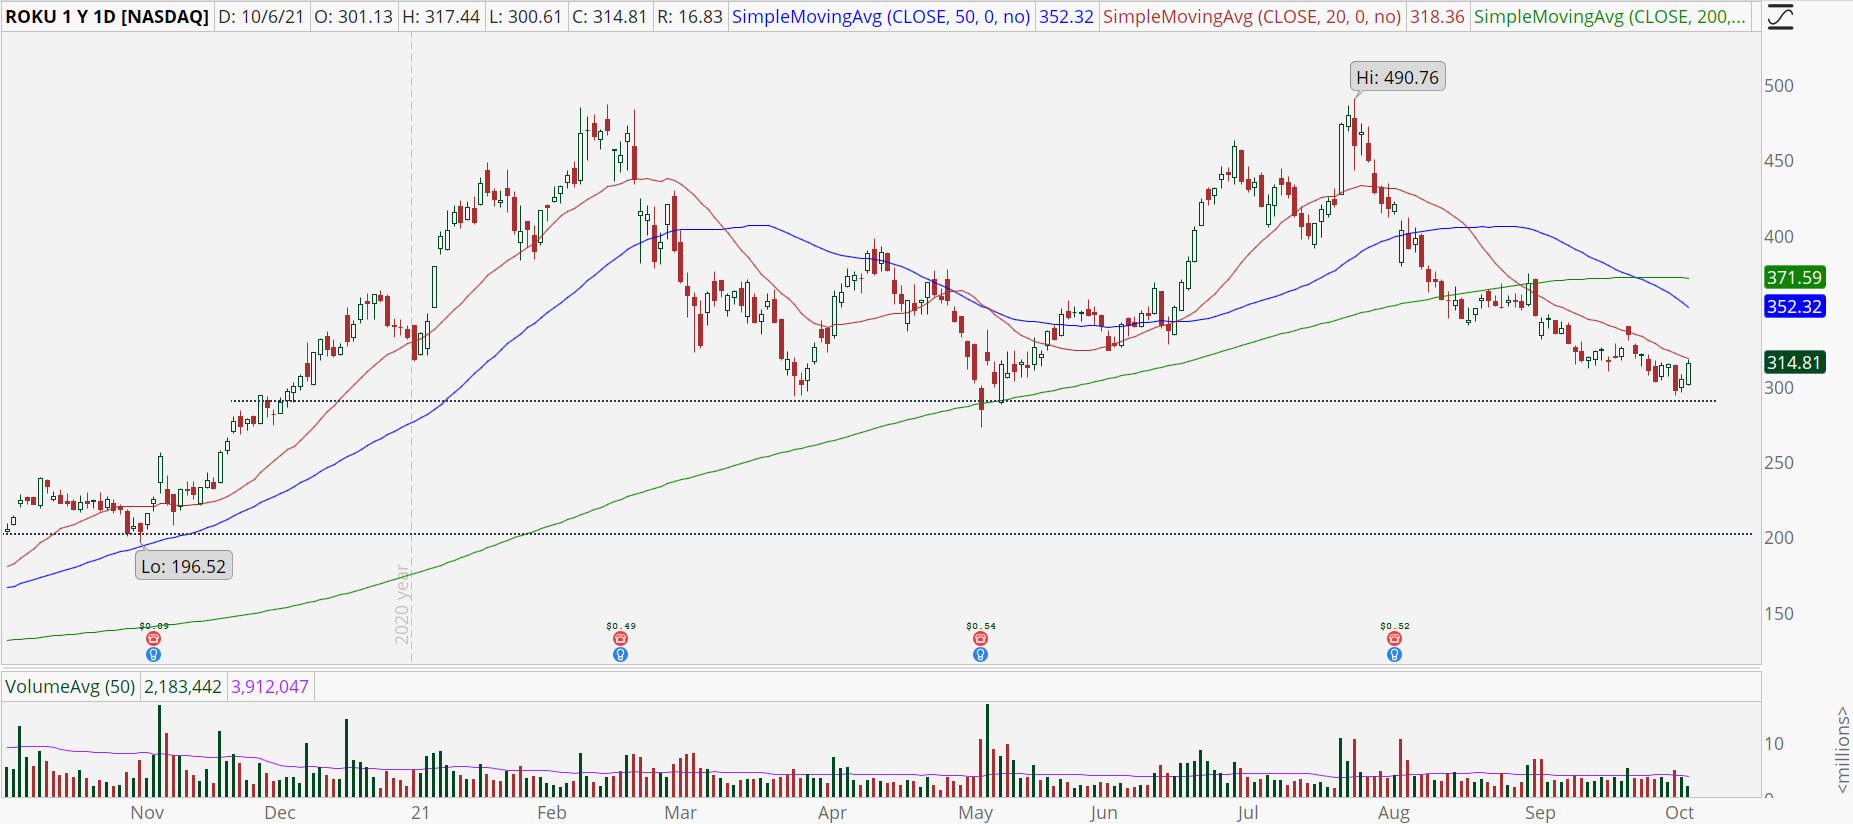 Roku (ROKU) daily stock chart with support test